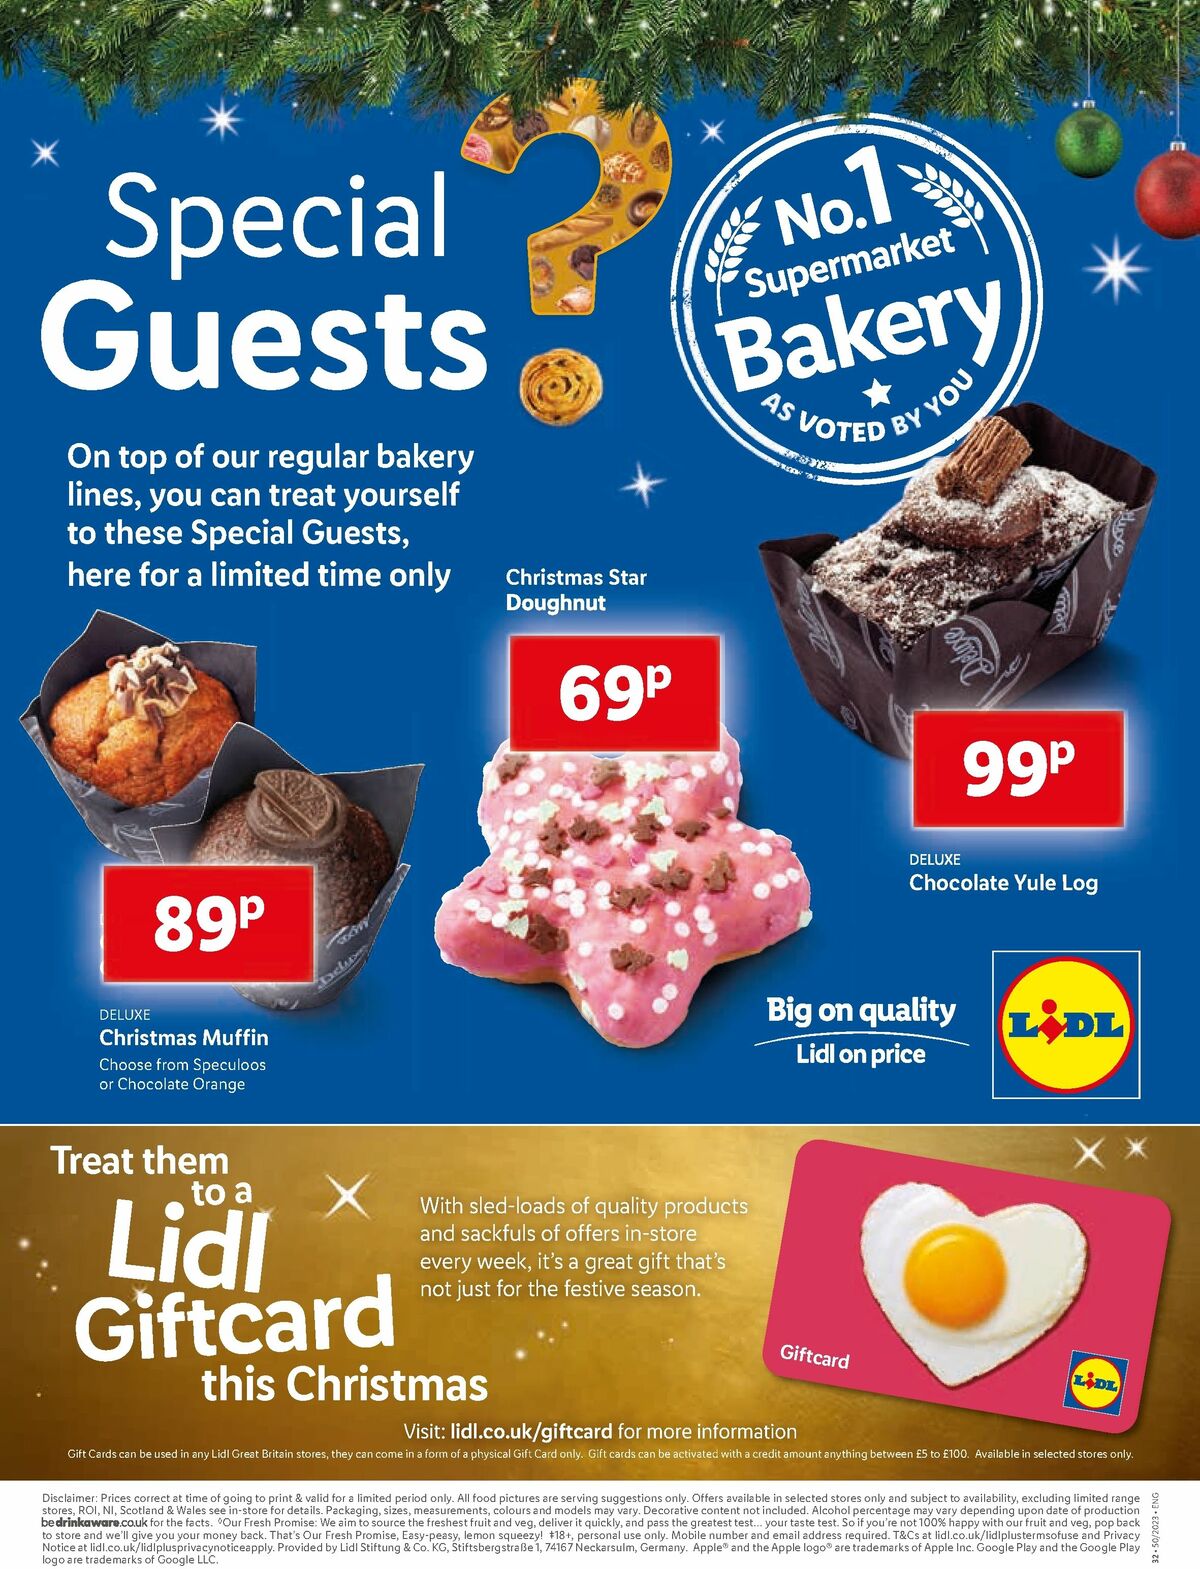 LIDL Offers from 14 December